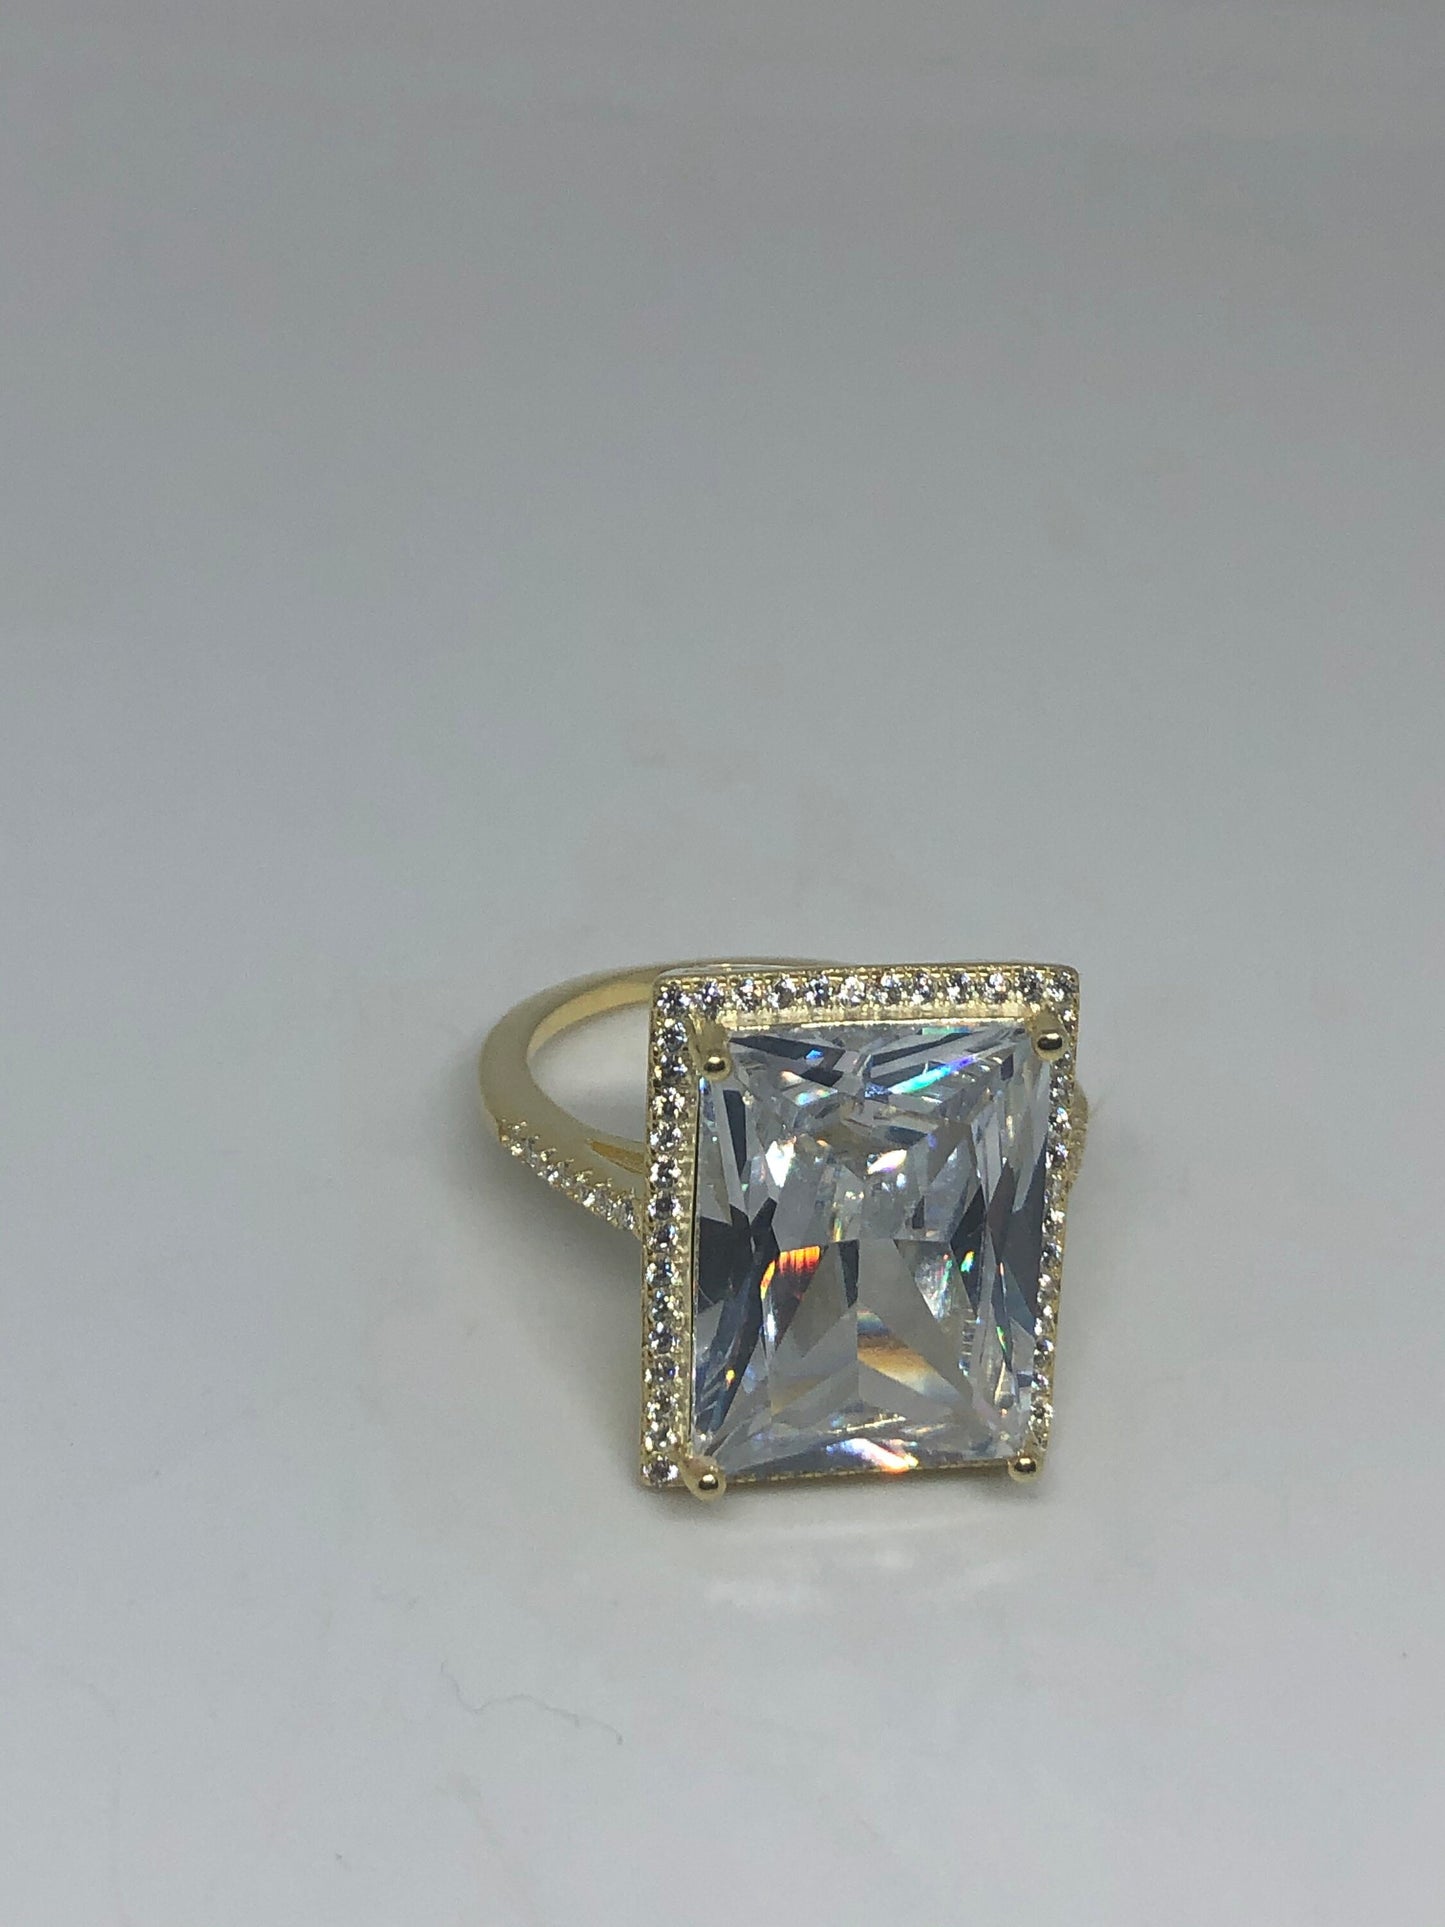 Vintage Cubic Zirconia Crystal Golden Sterling Silver Ring Size 9